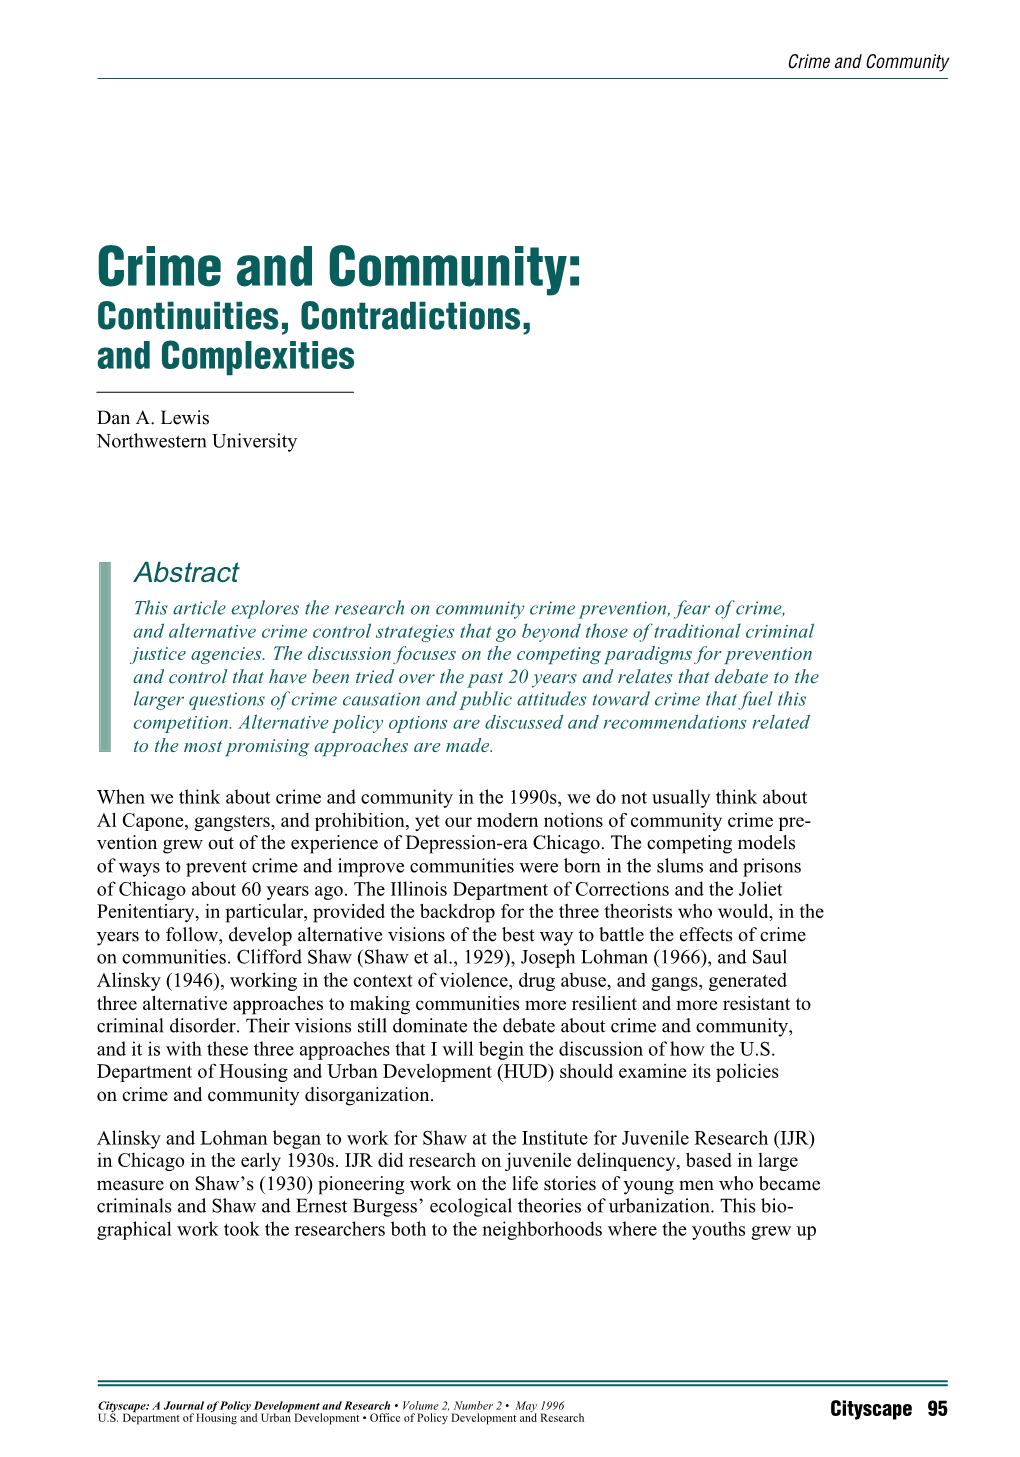 Crime and Community: Continuities, Contradictions, and Complexities